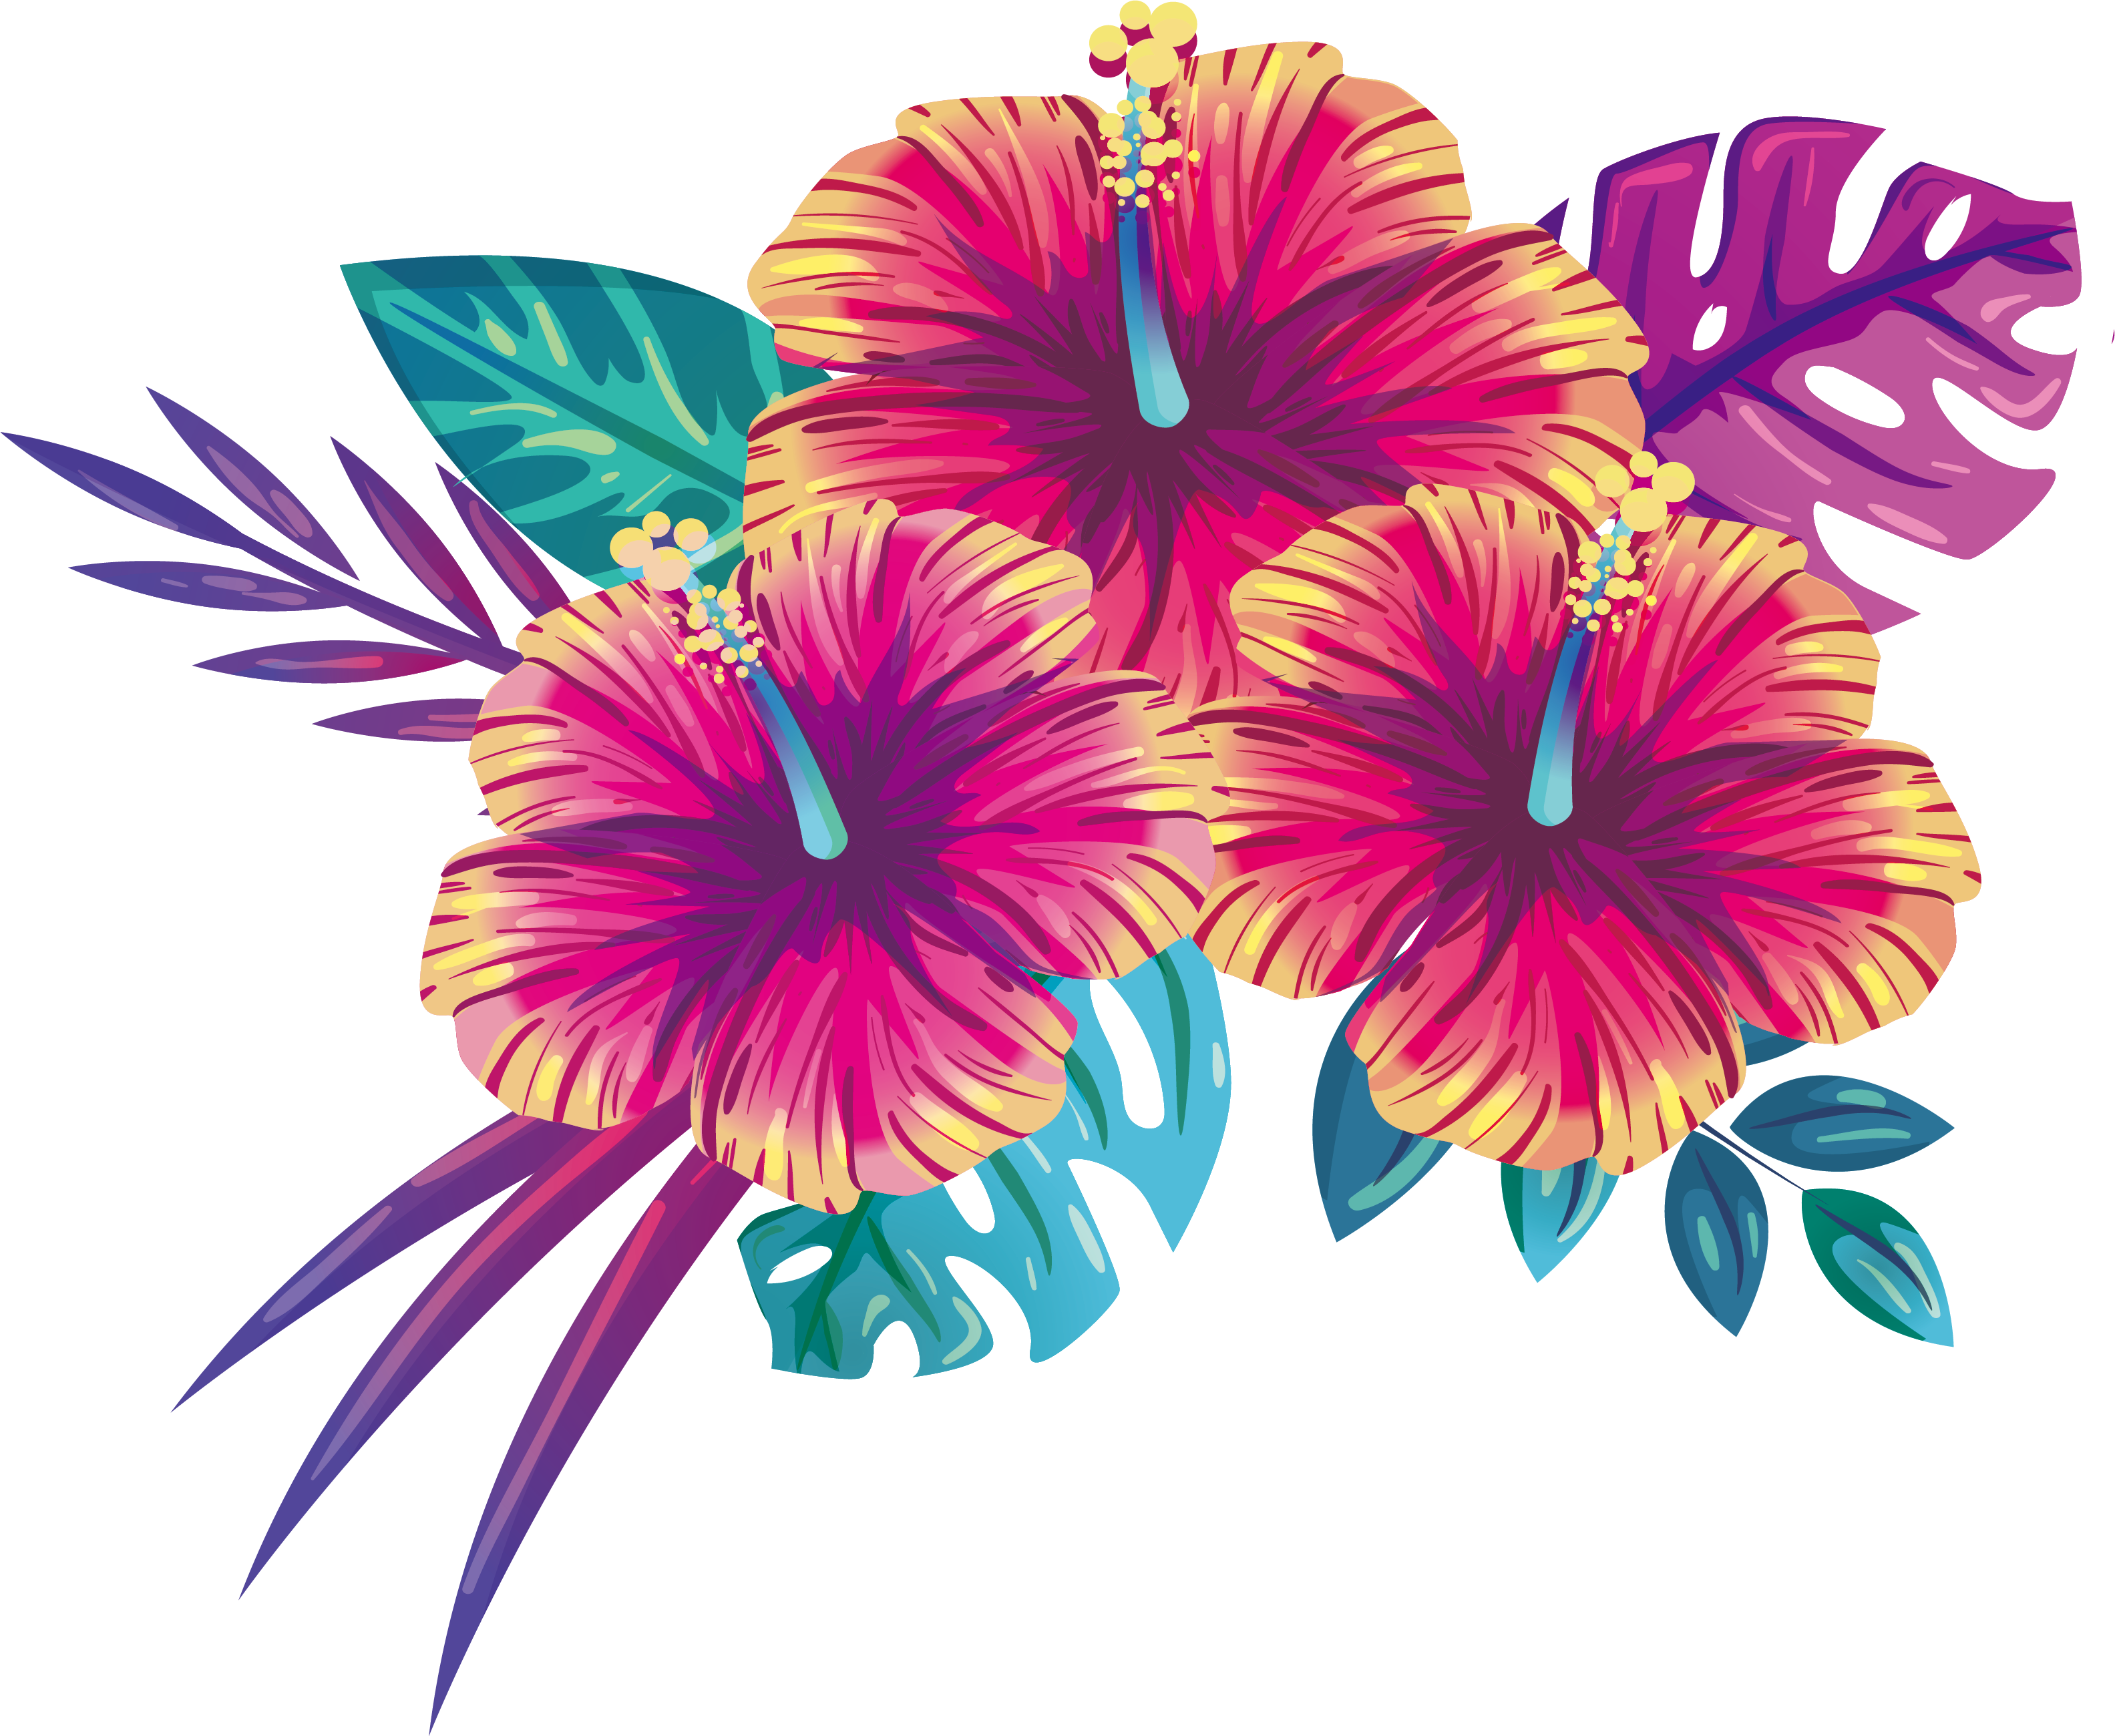 Download Clipart Icon - Summer Flowers Blooming Free Clipart HQ.